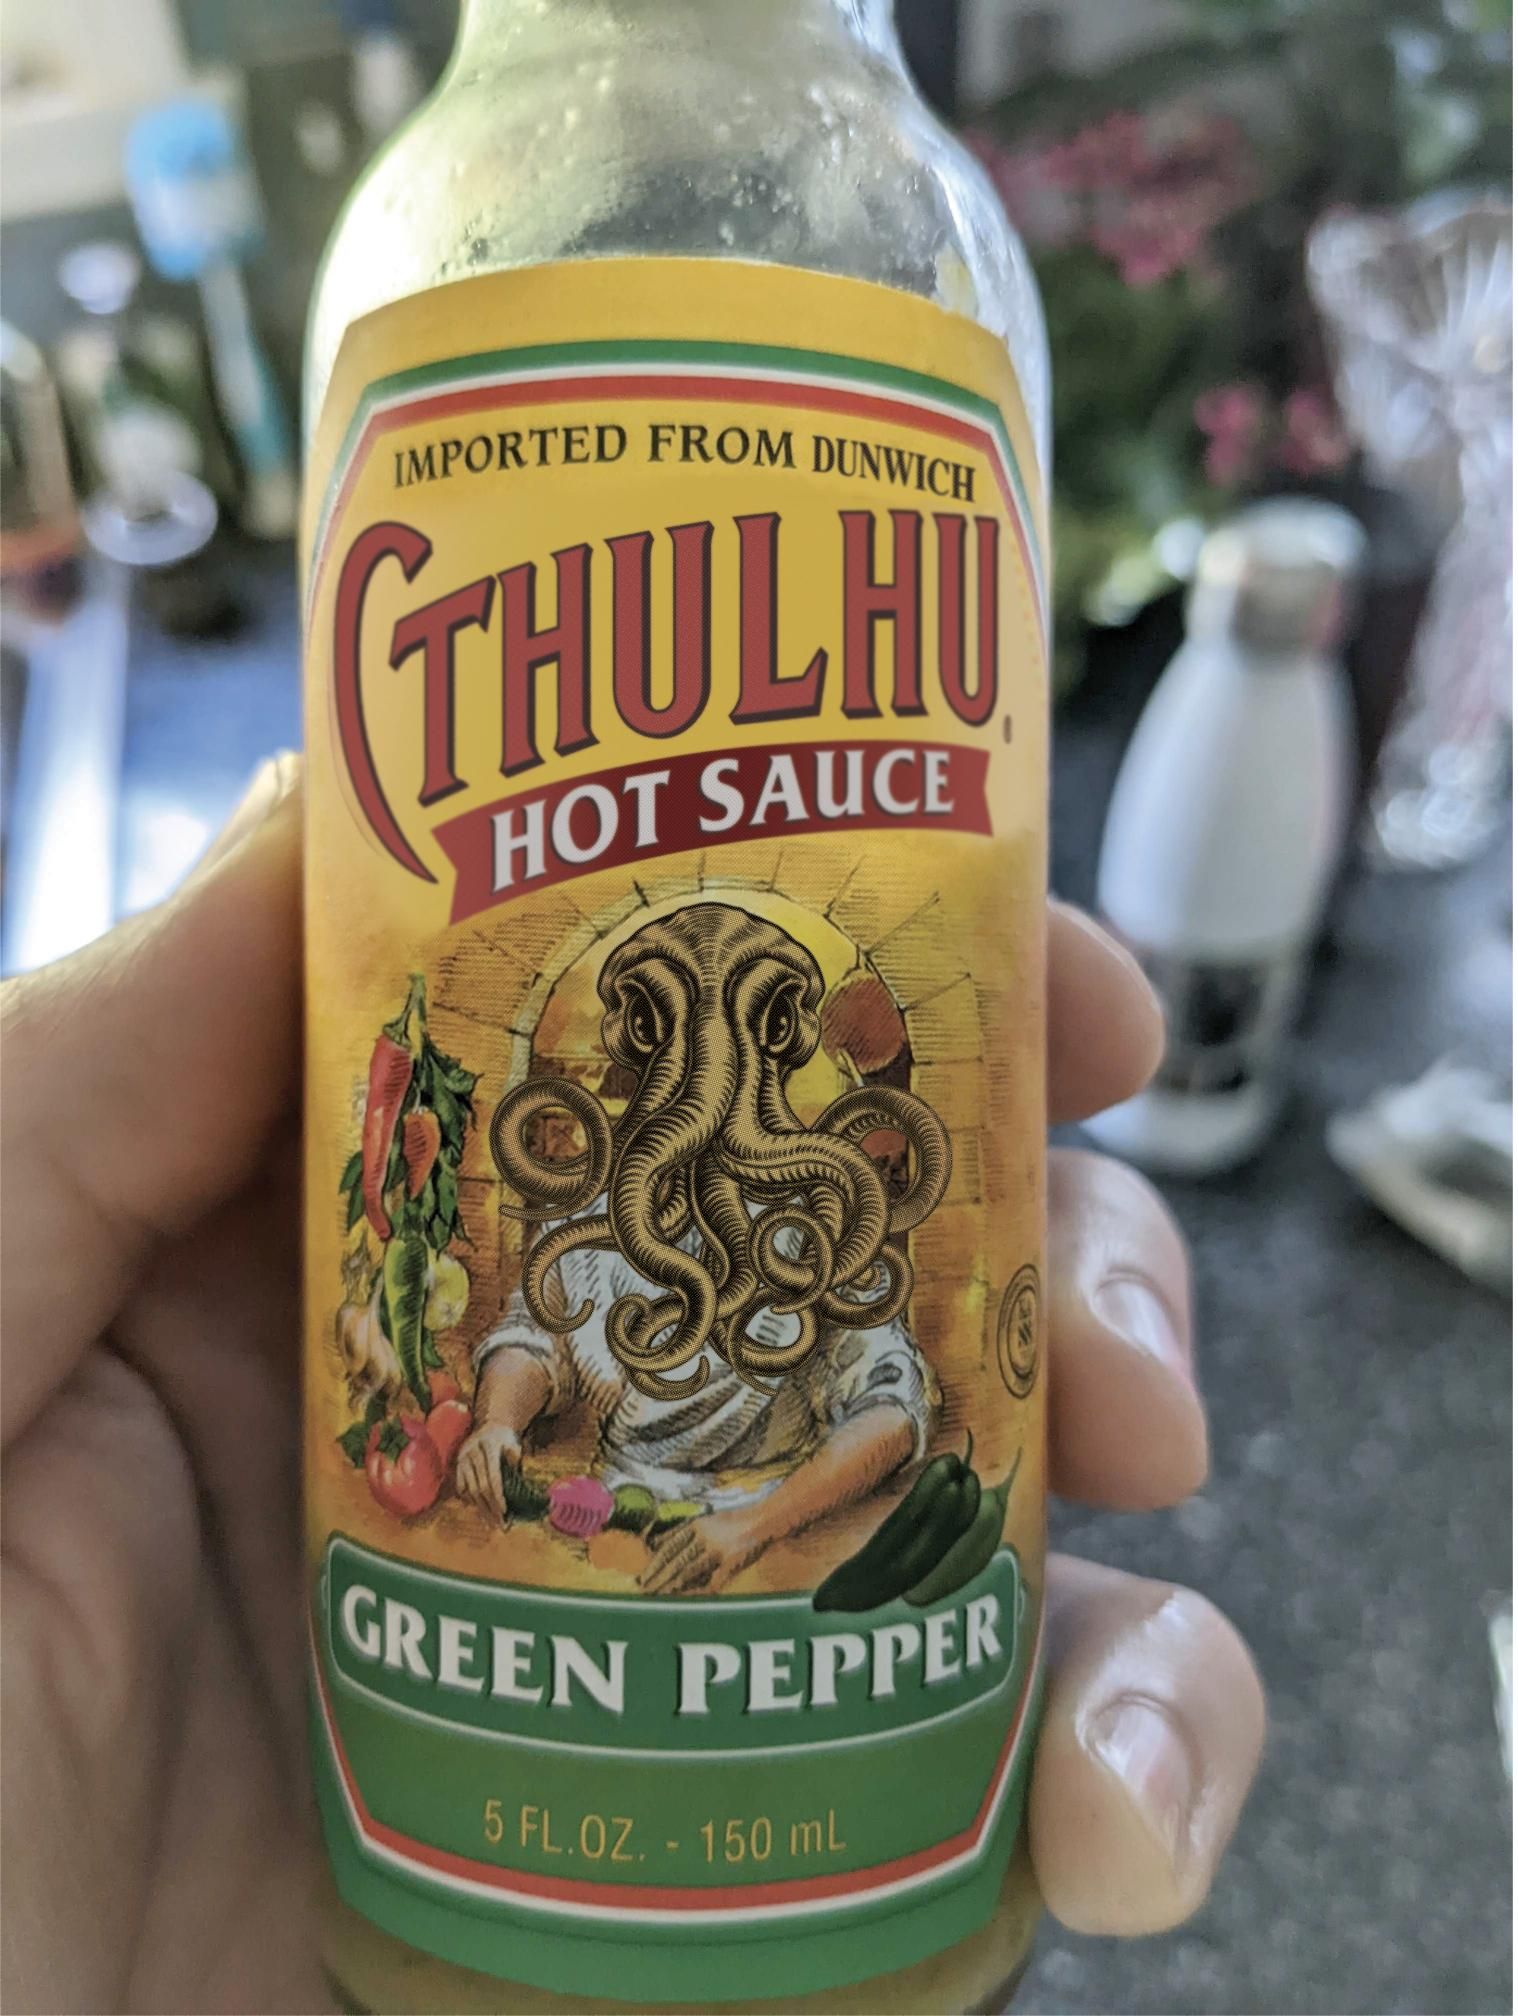 Wait a minute, this isn't my usual hot sauce...